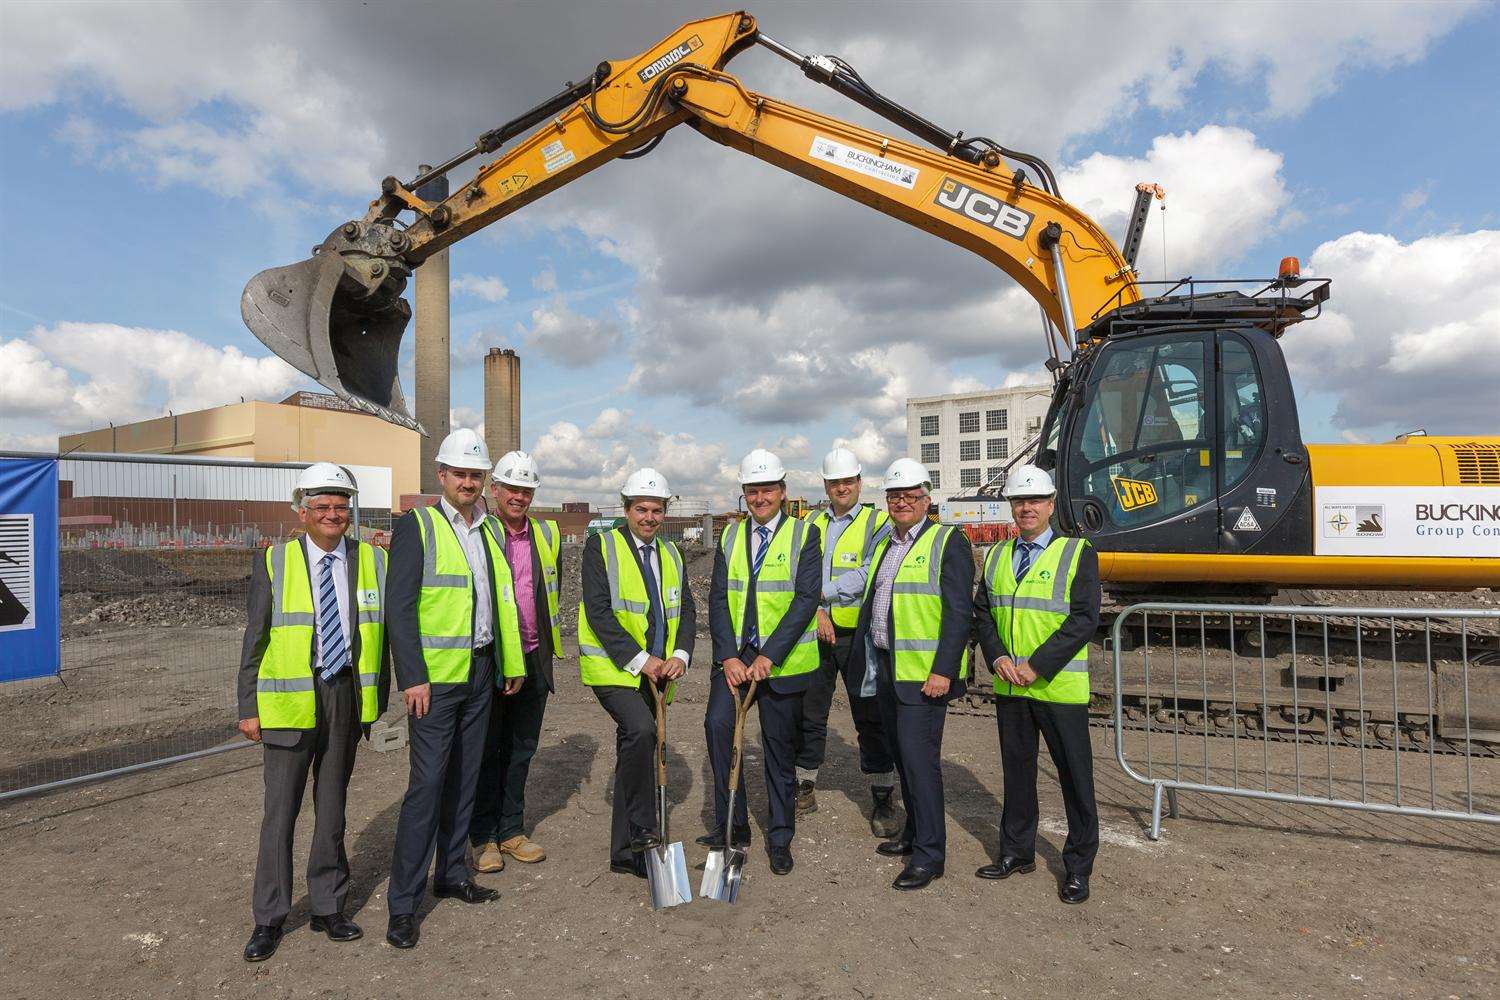 Construction work begins, from left, Carl Potter of Europa, Jamie West of Prologis, Colin Overall of Buckingham Group, Gareth Johnson MP, Andrew Baxter of Europa, Robin Russell of Buckingham Group, Paul Weston of Prologis and Russell Keep of Europa